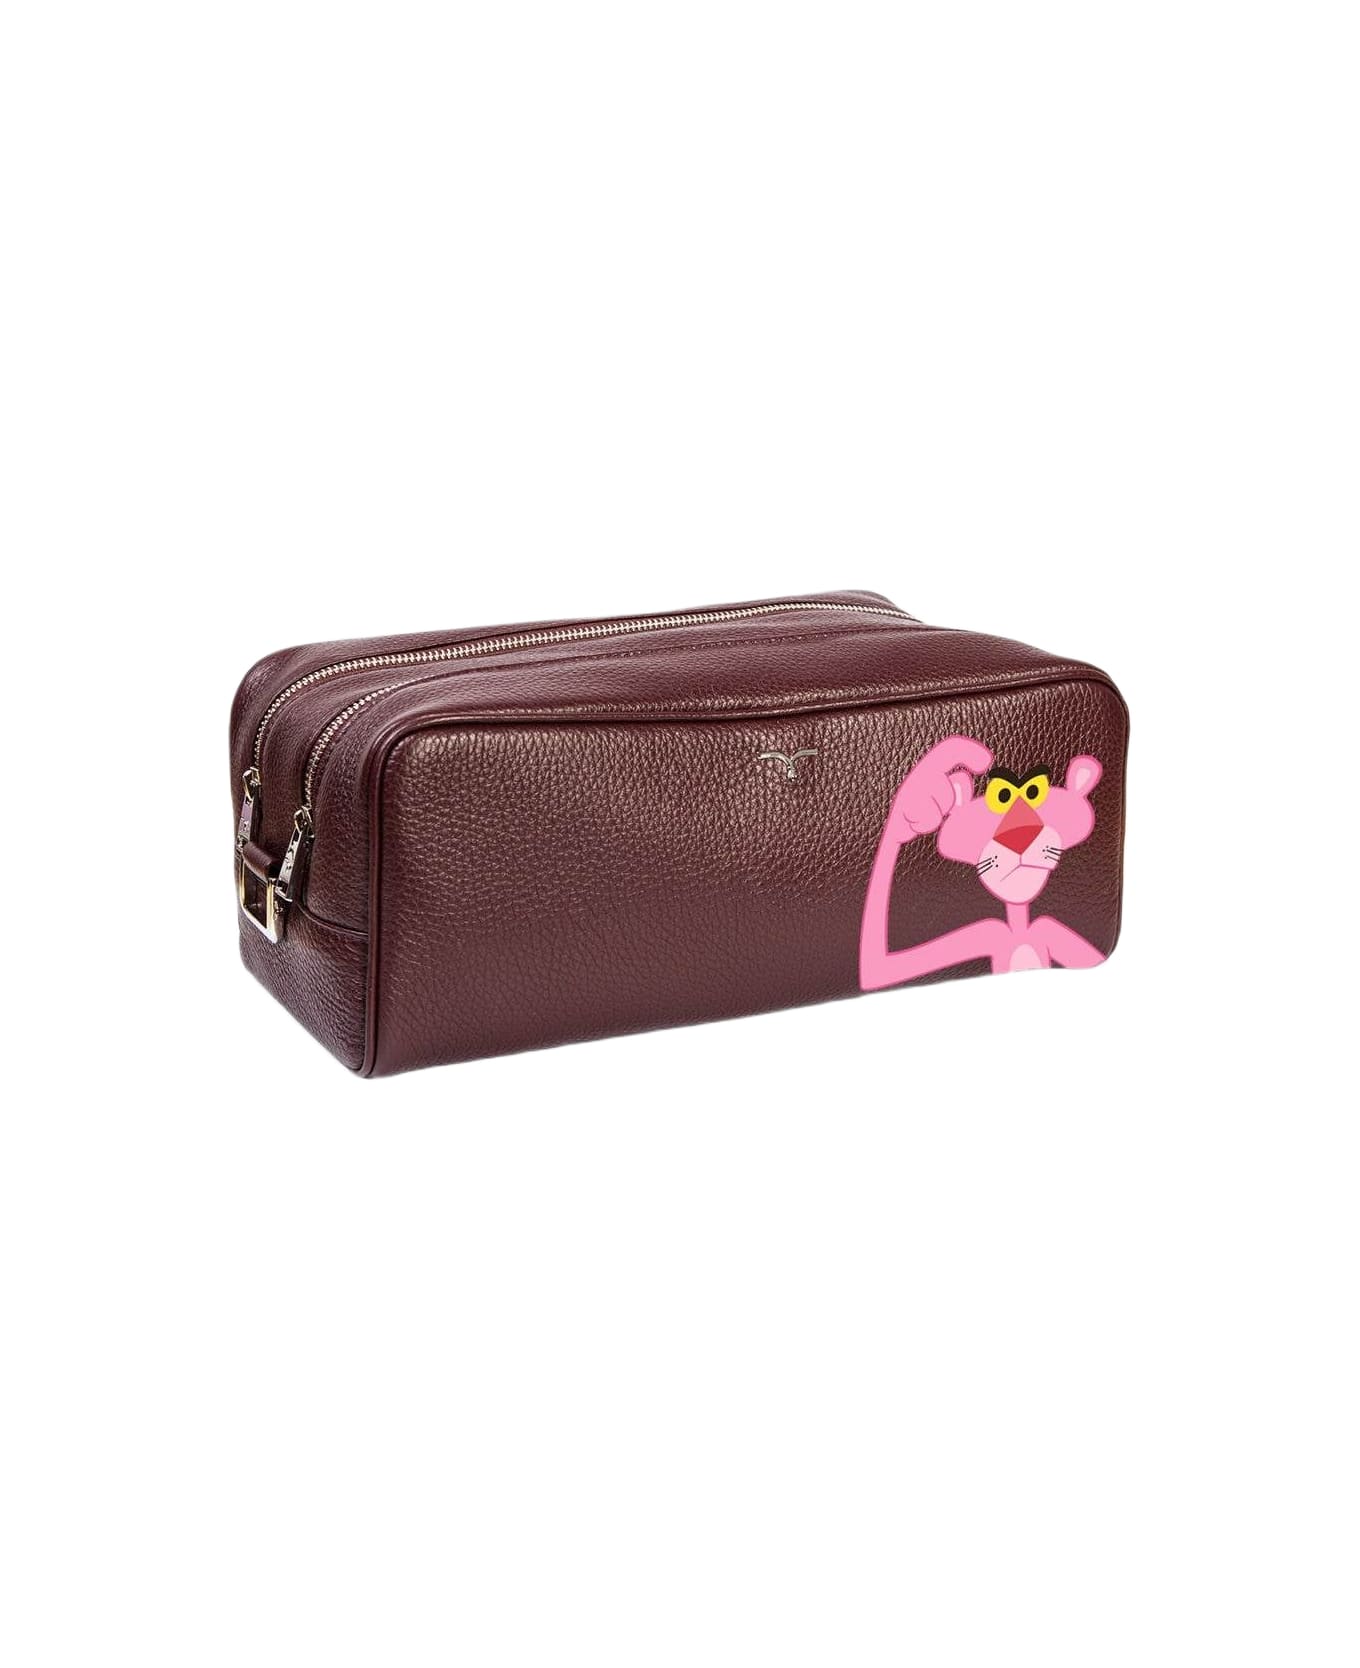 Larusmiani Nécessaire 'pink Panther' Luggage - DarkRed